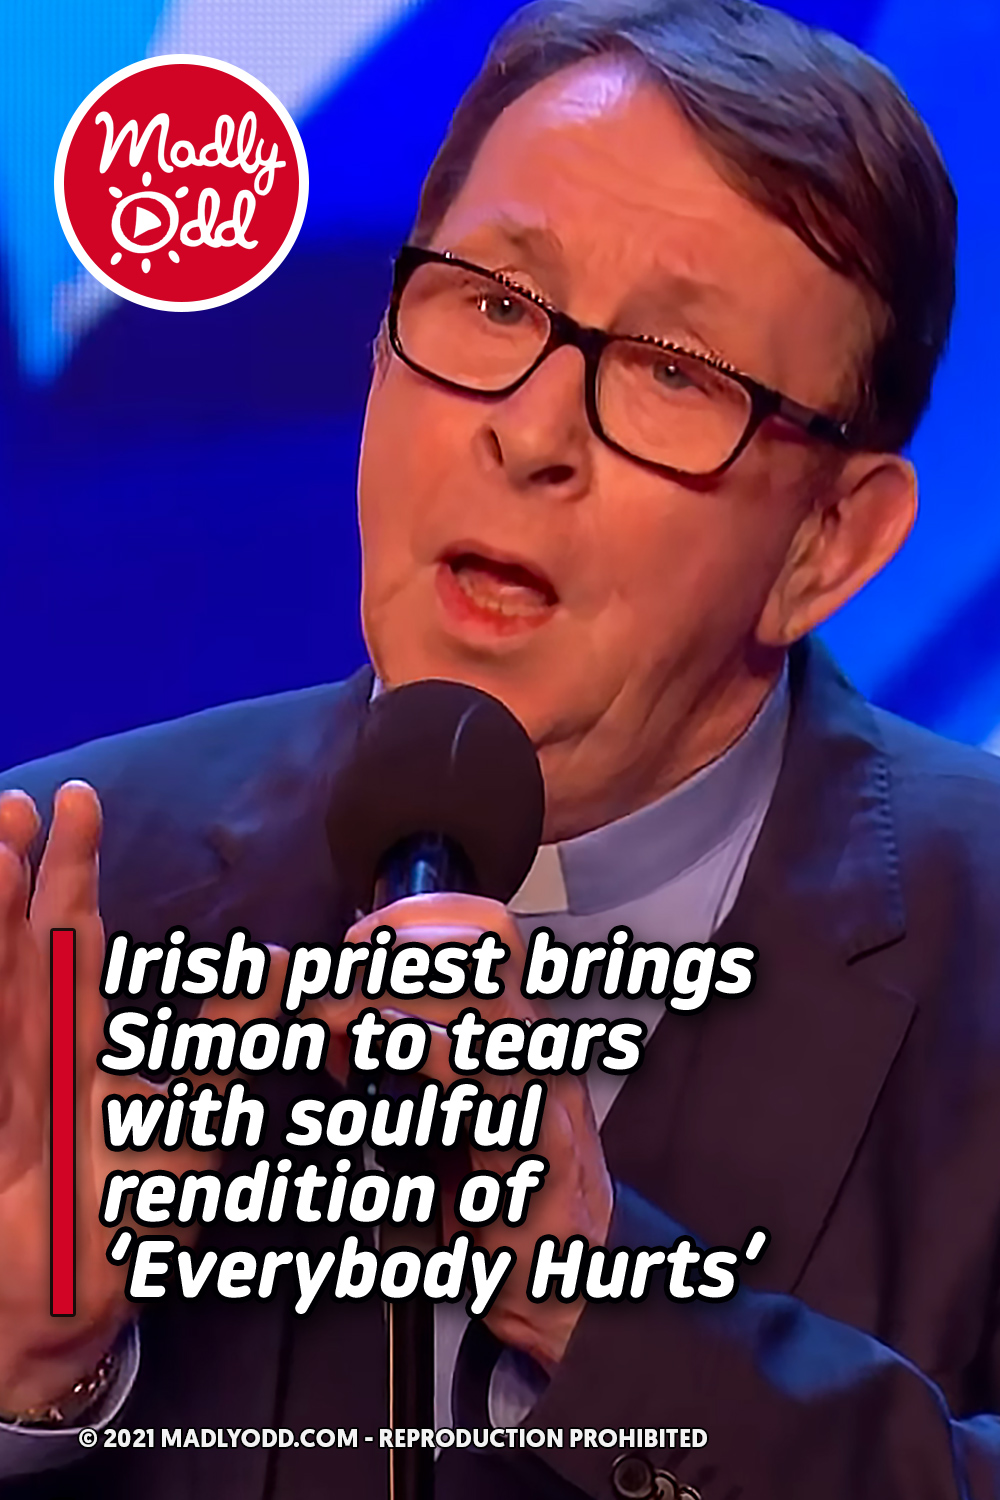 Irish priest brings Simon to tears with soulful rendition of ‘Everybody Hurts’